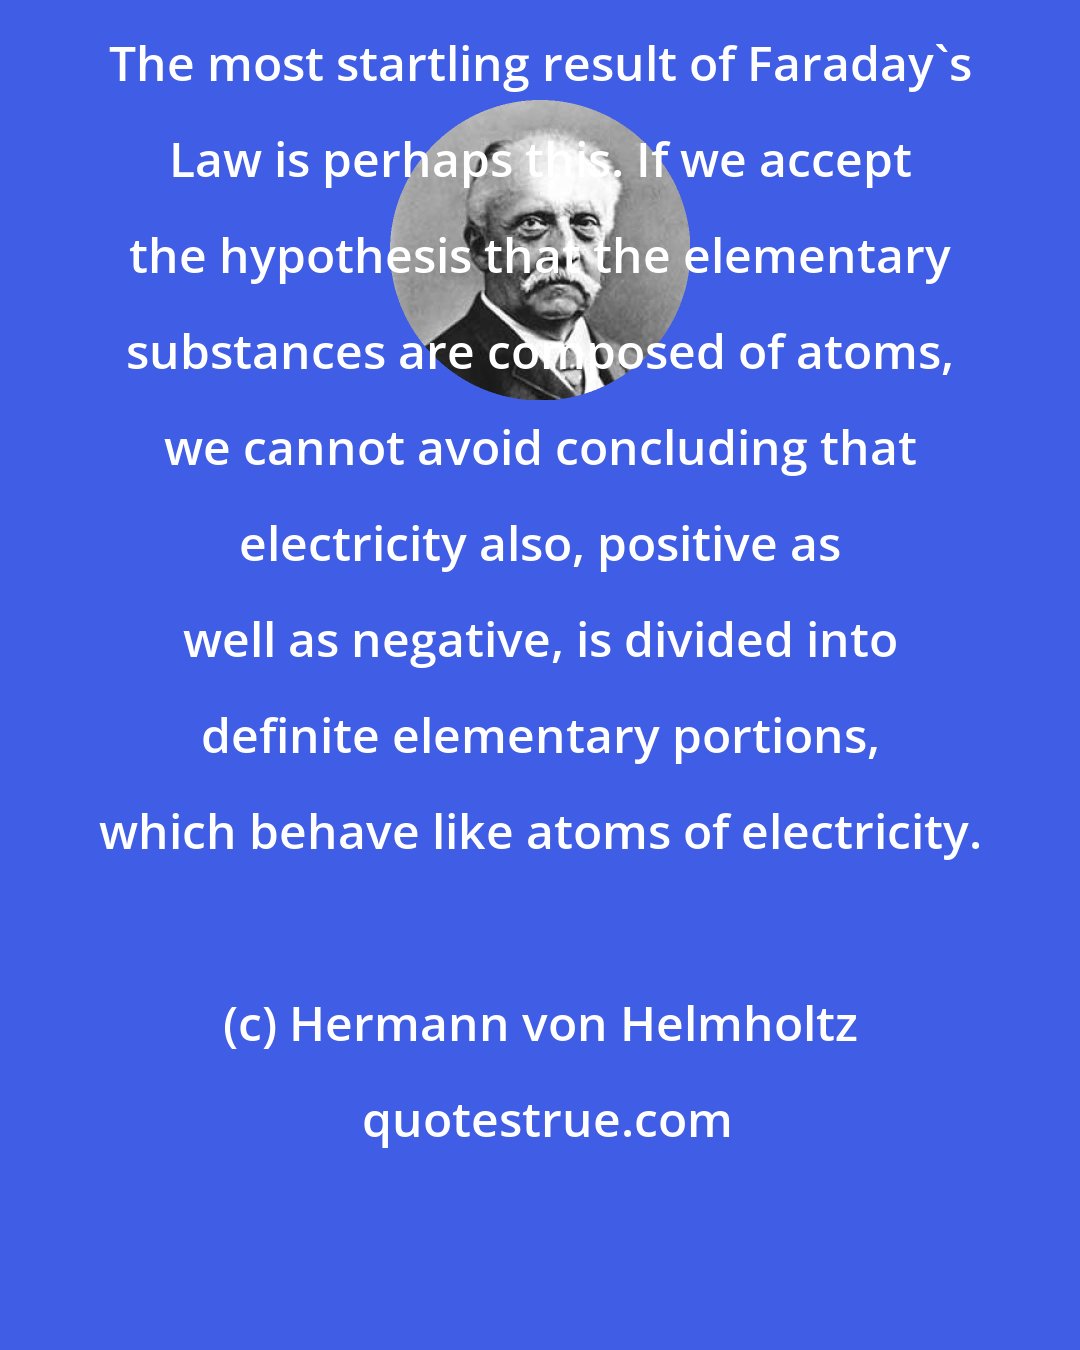 Hermann von Helmholtz: The most startling result of Faraday's Law is perhaps this. If we accept the hypothesis that the elementary substances are composed of atoms, we cannot avoid concluding that electricity also, positive as well as negative, is divided into definite elementary portions, which behave like atoms of electricity.